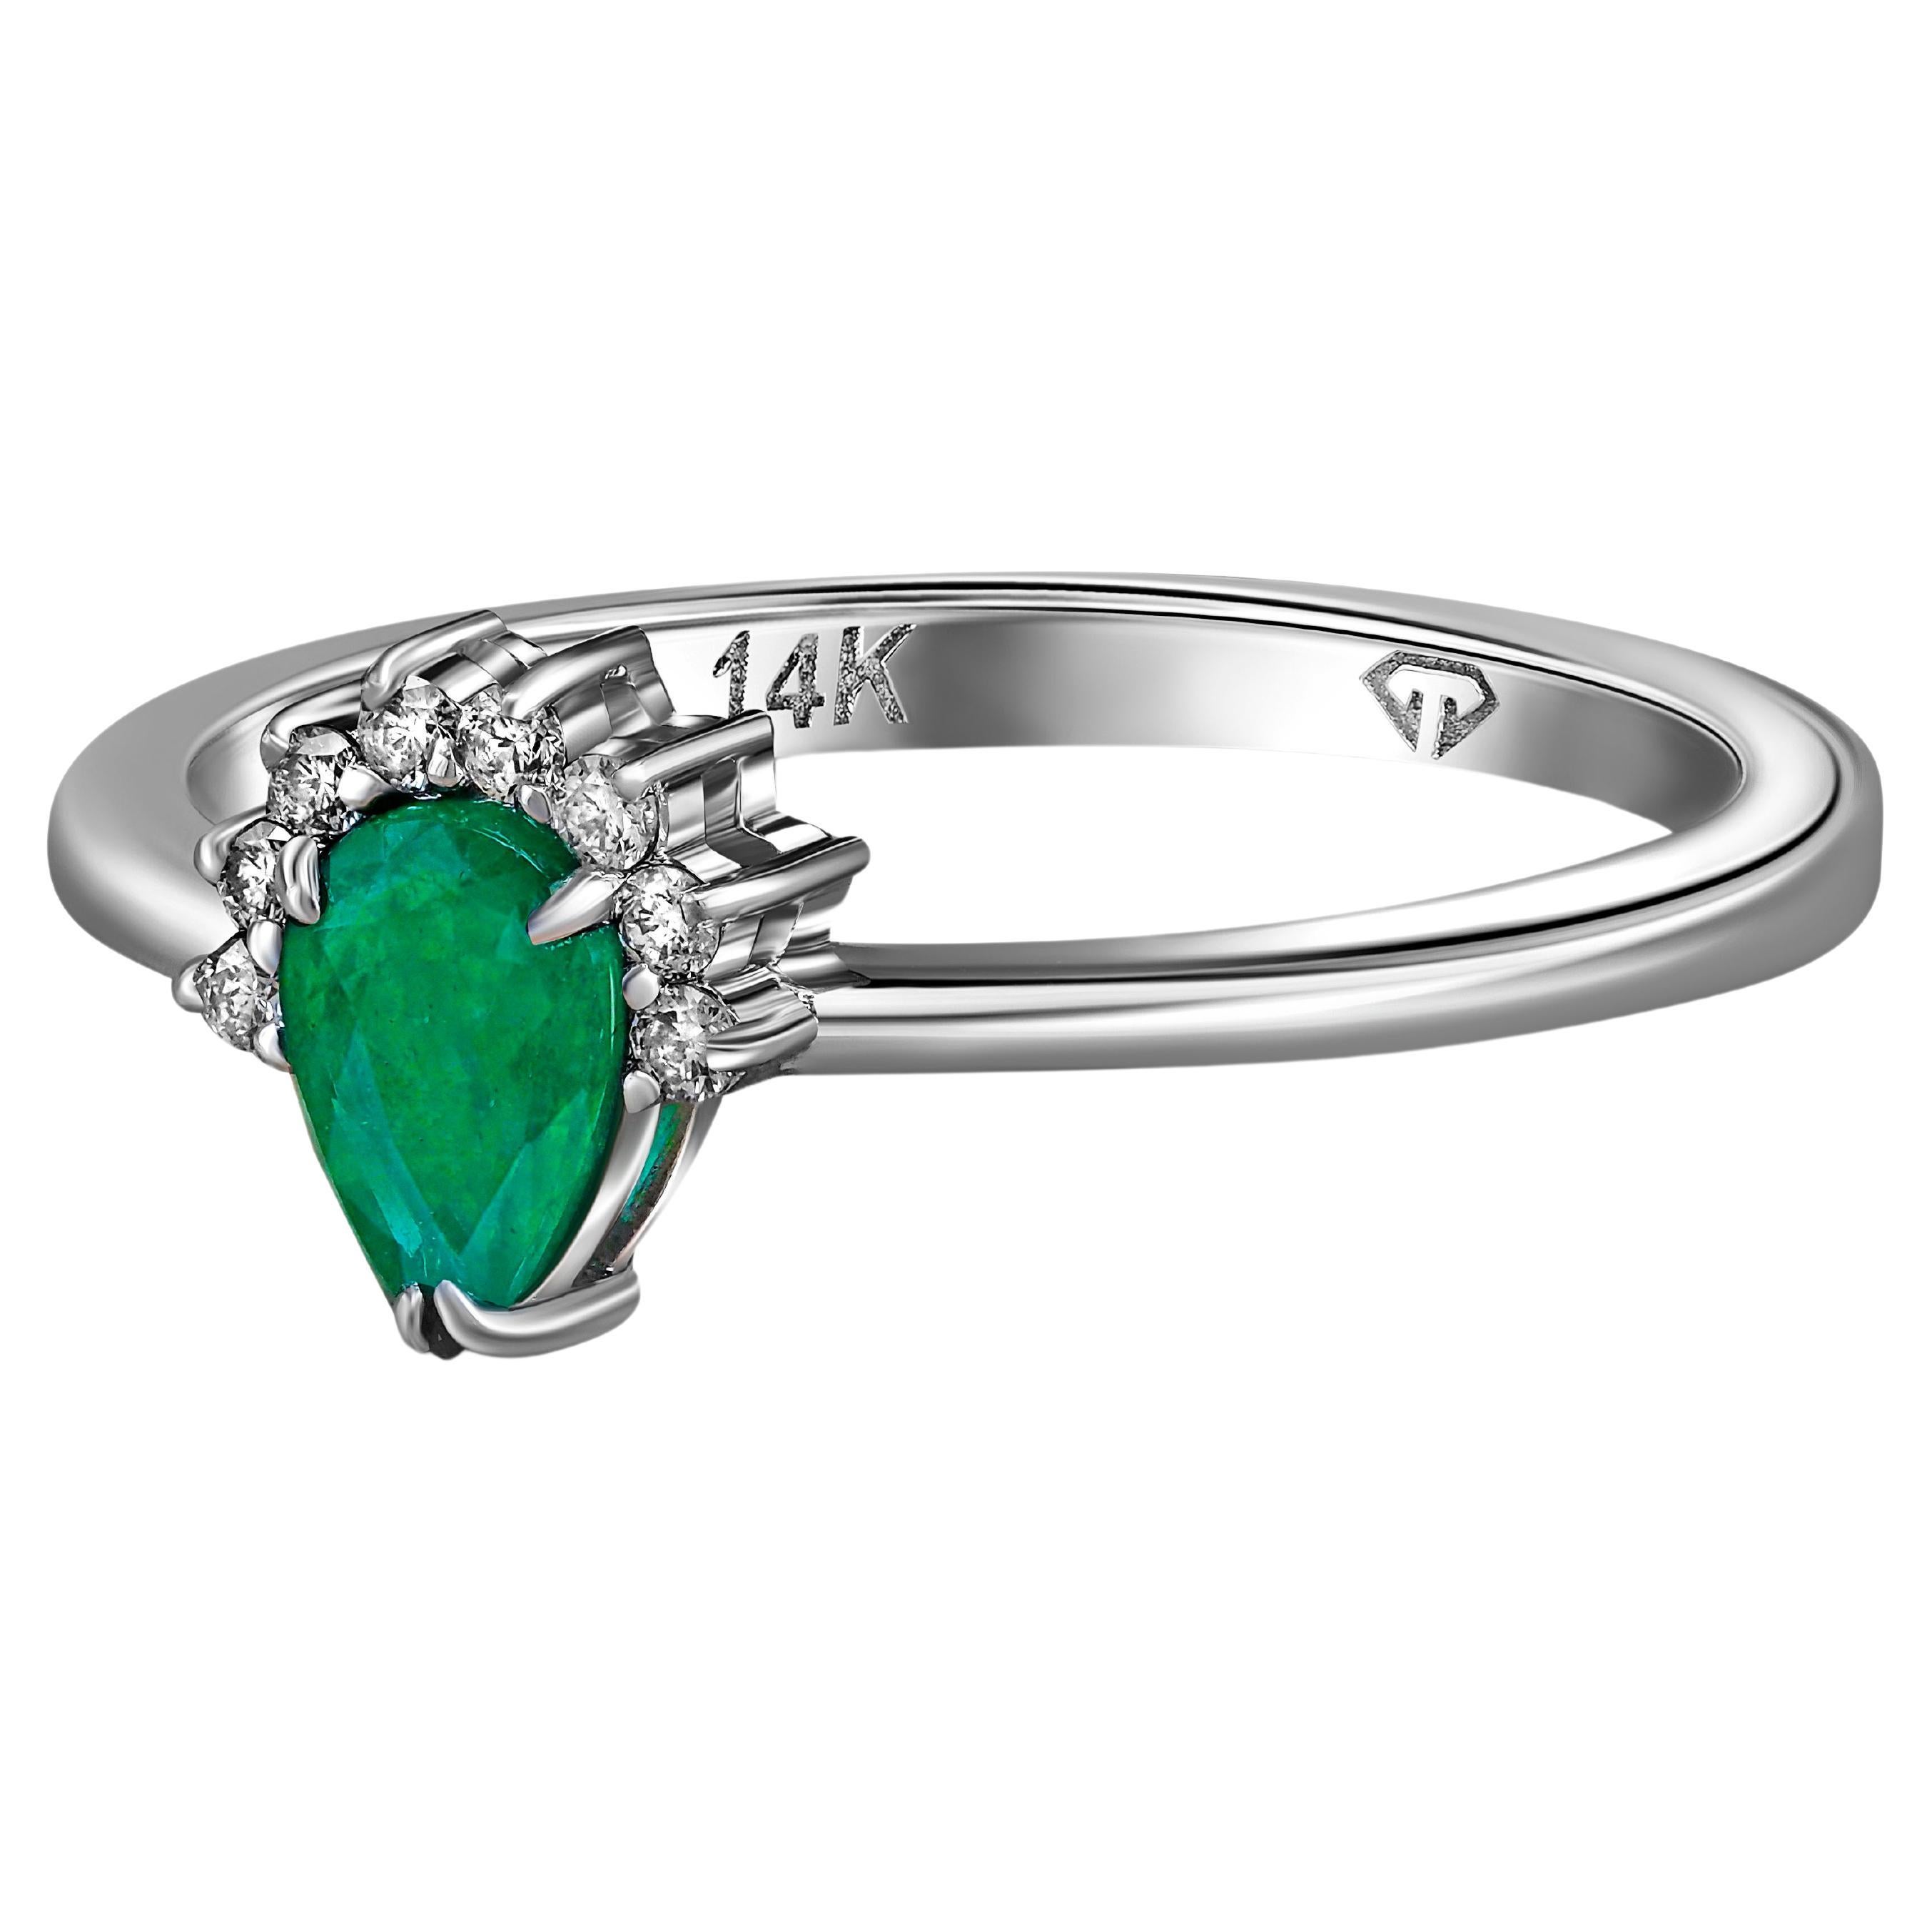 Pear emerald ring in 14k gold. 